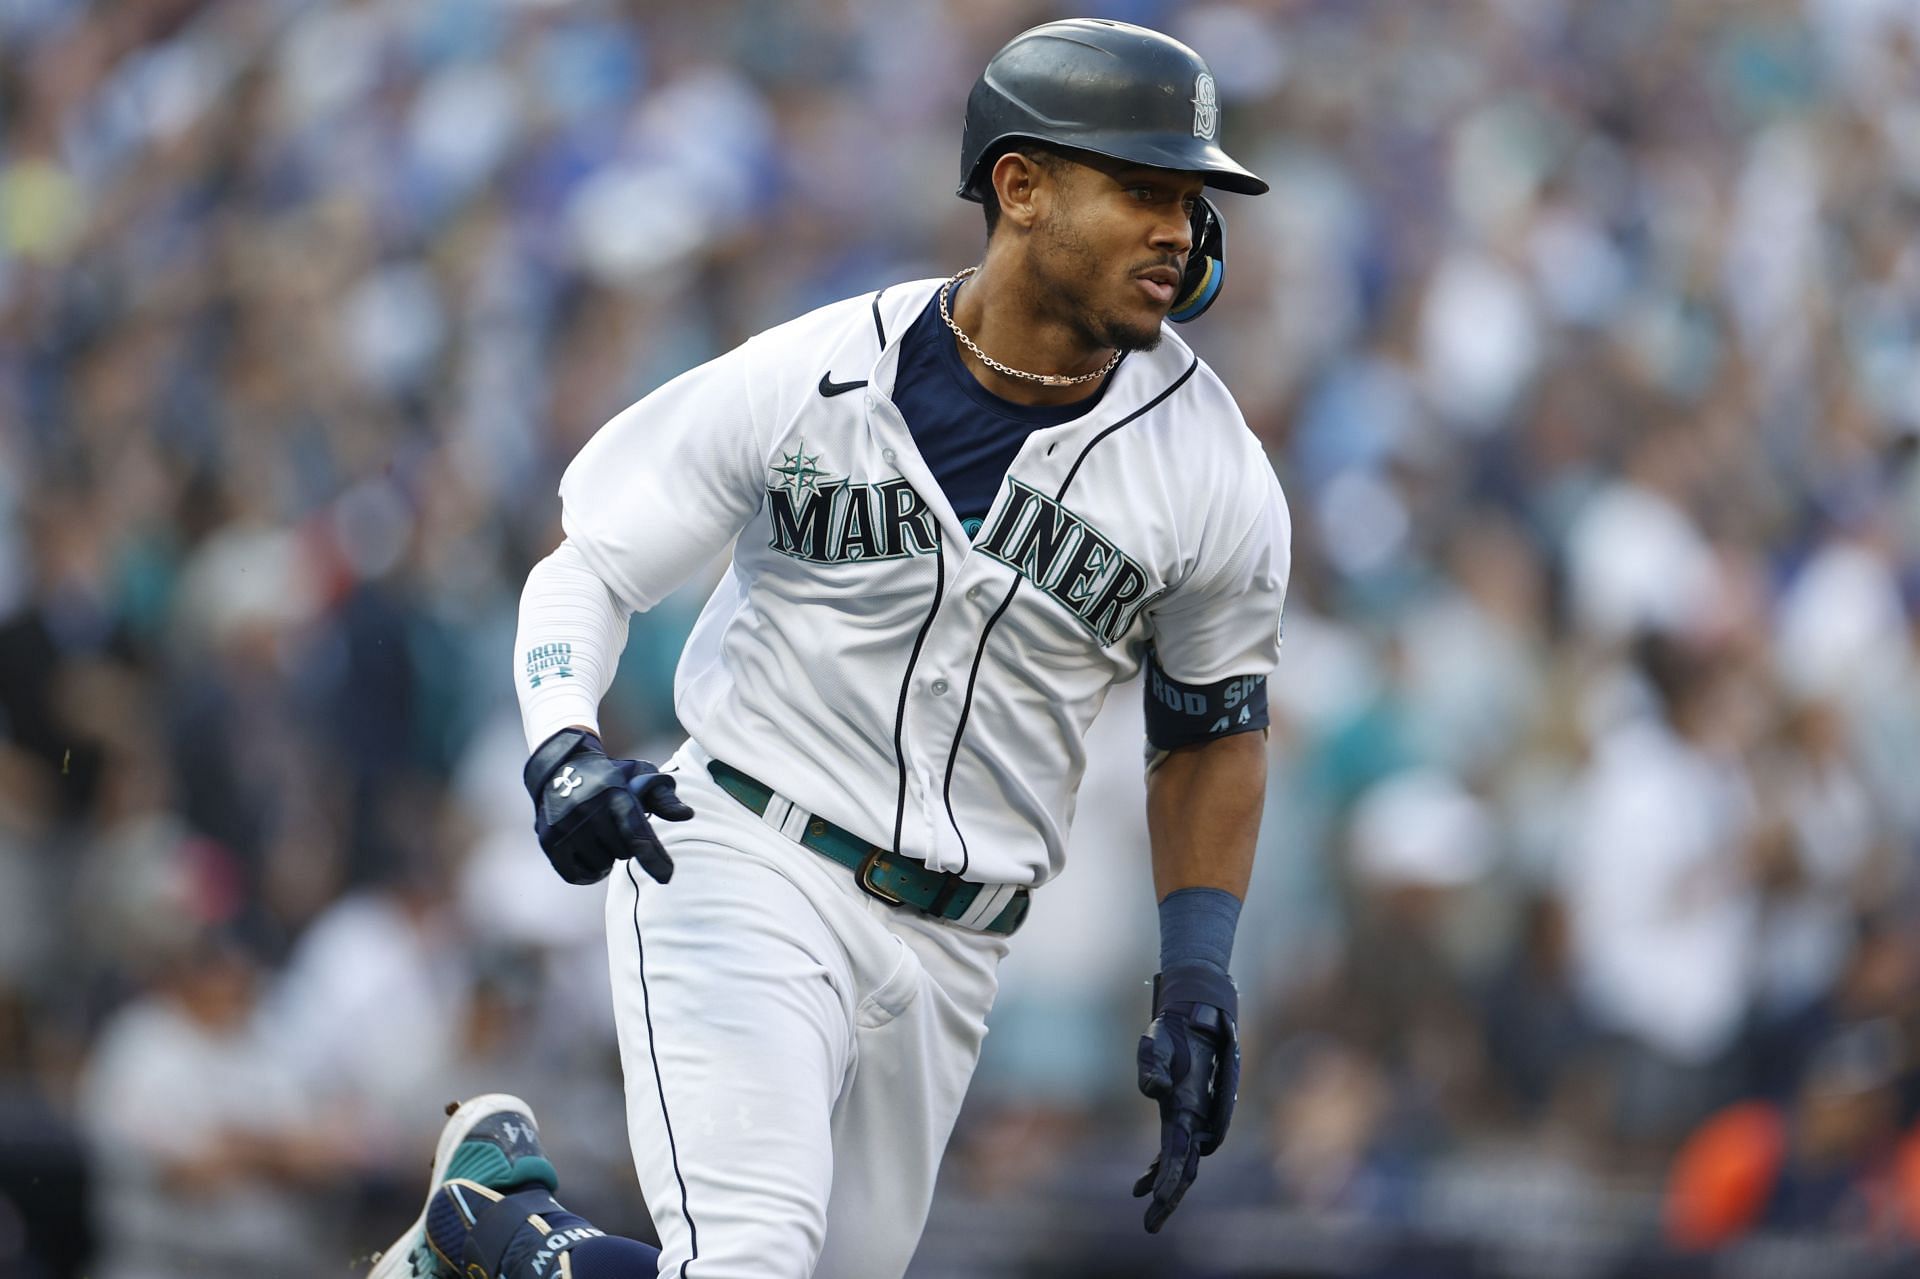 ESPNs Passan: 'Confusing' why Seattle Mariners aren't better